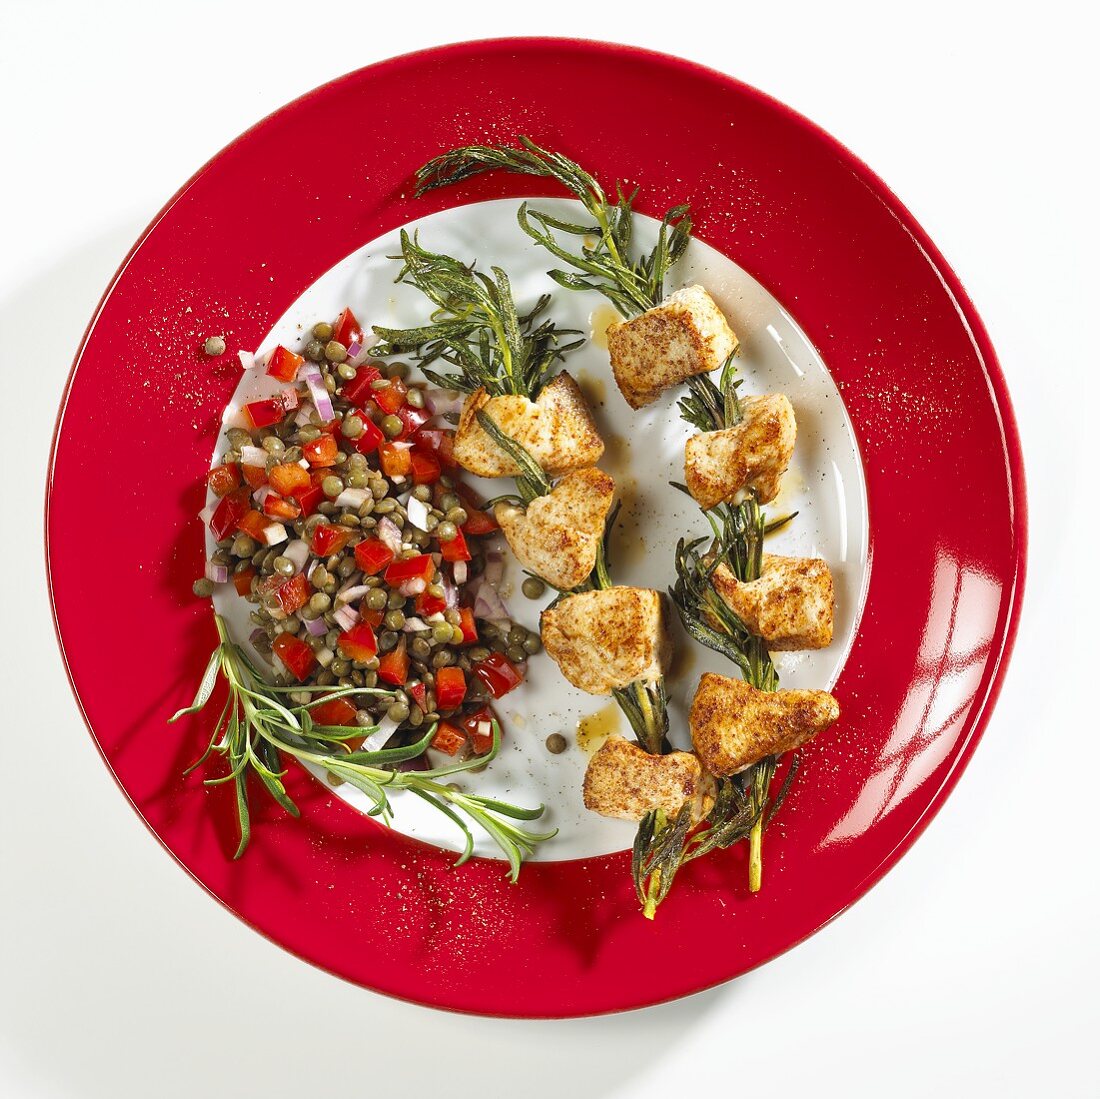 Grilled chicken on rosemary skewers with lentil salad